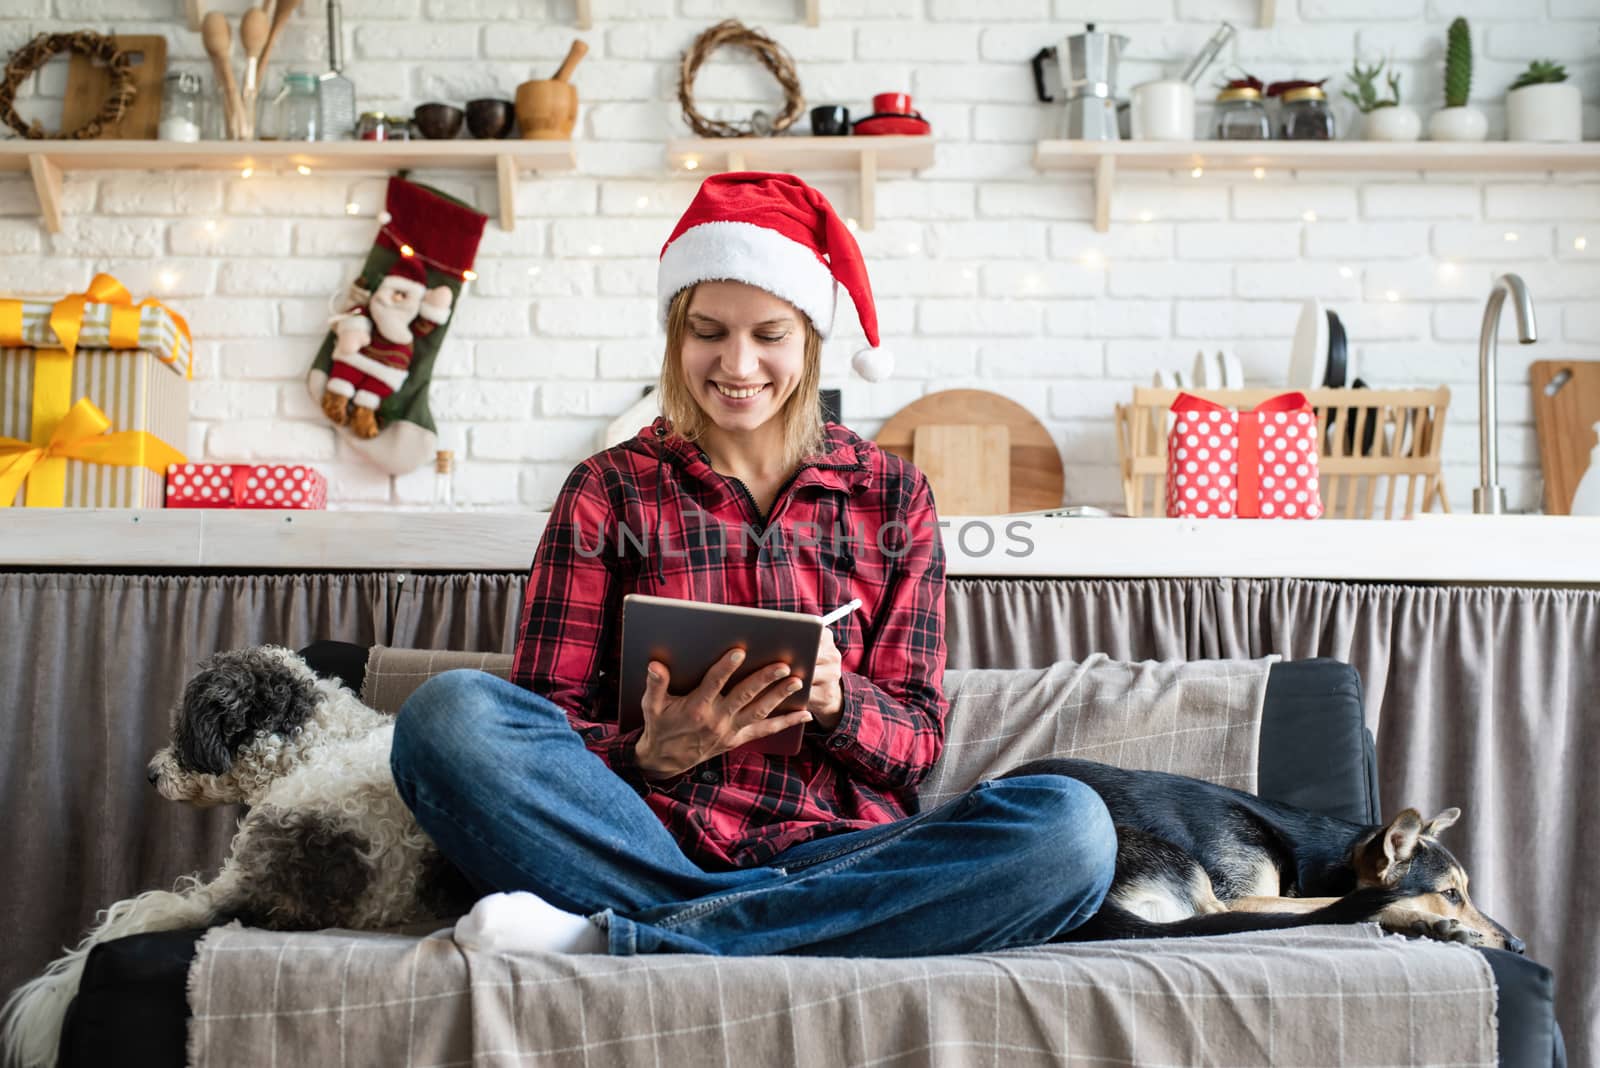 Chhristmas online greetings. young blond woman in santa hat working on tablet sitting on the couch